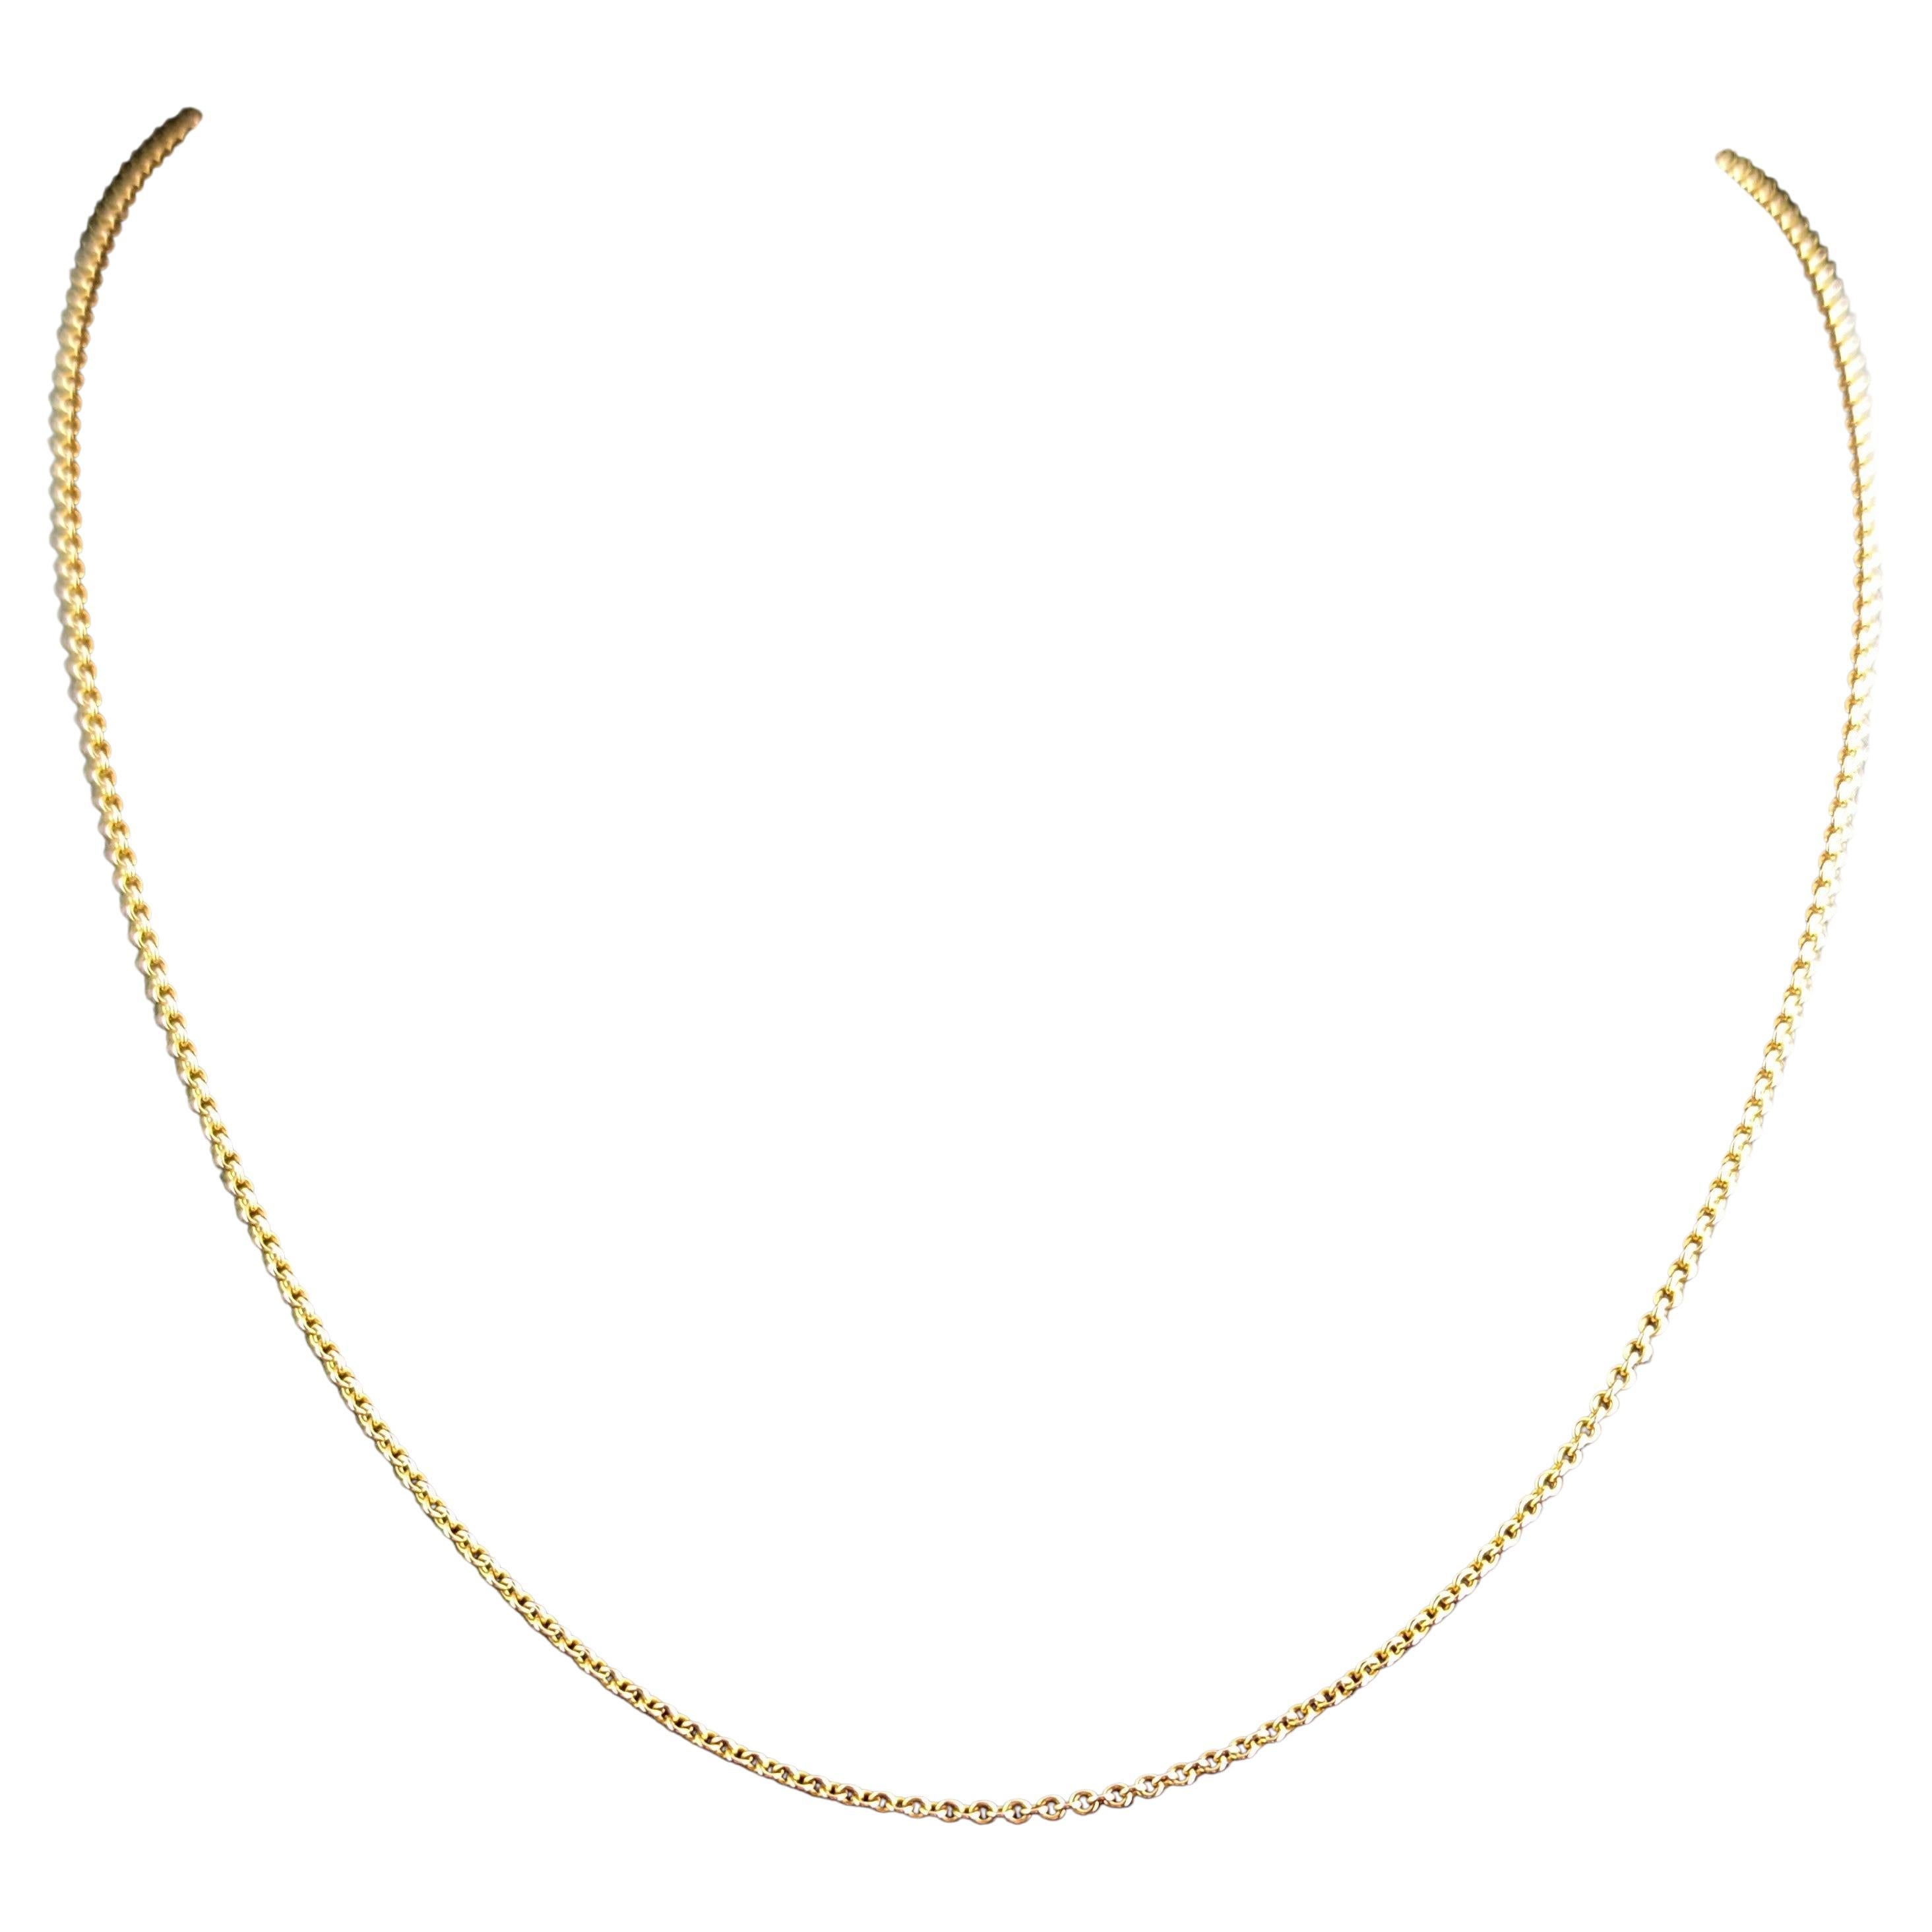 Antique 9k Yellow Gold Dainty Trace Link Chain Necklace